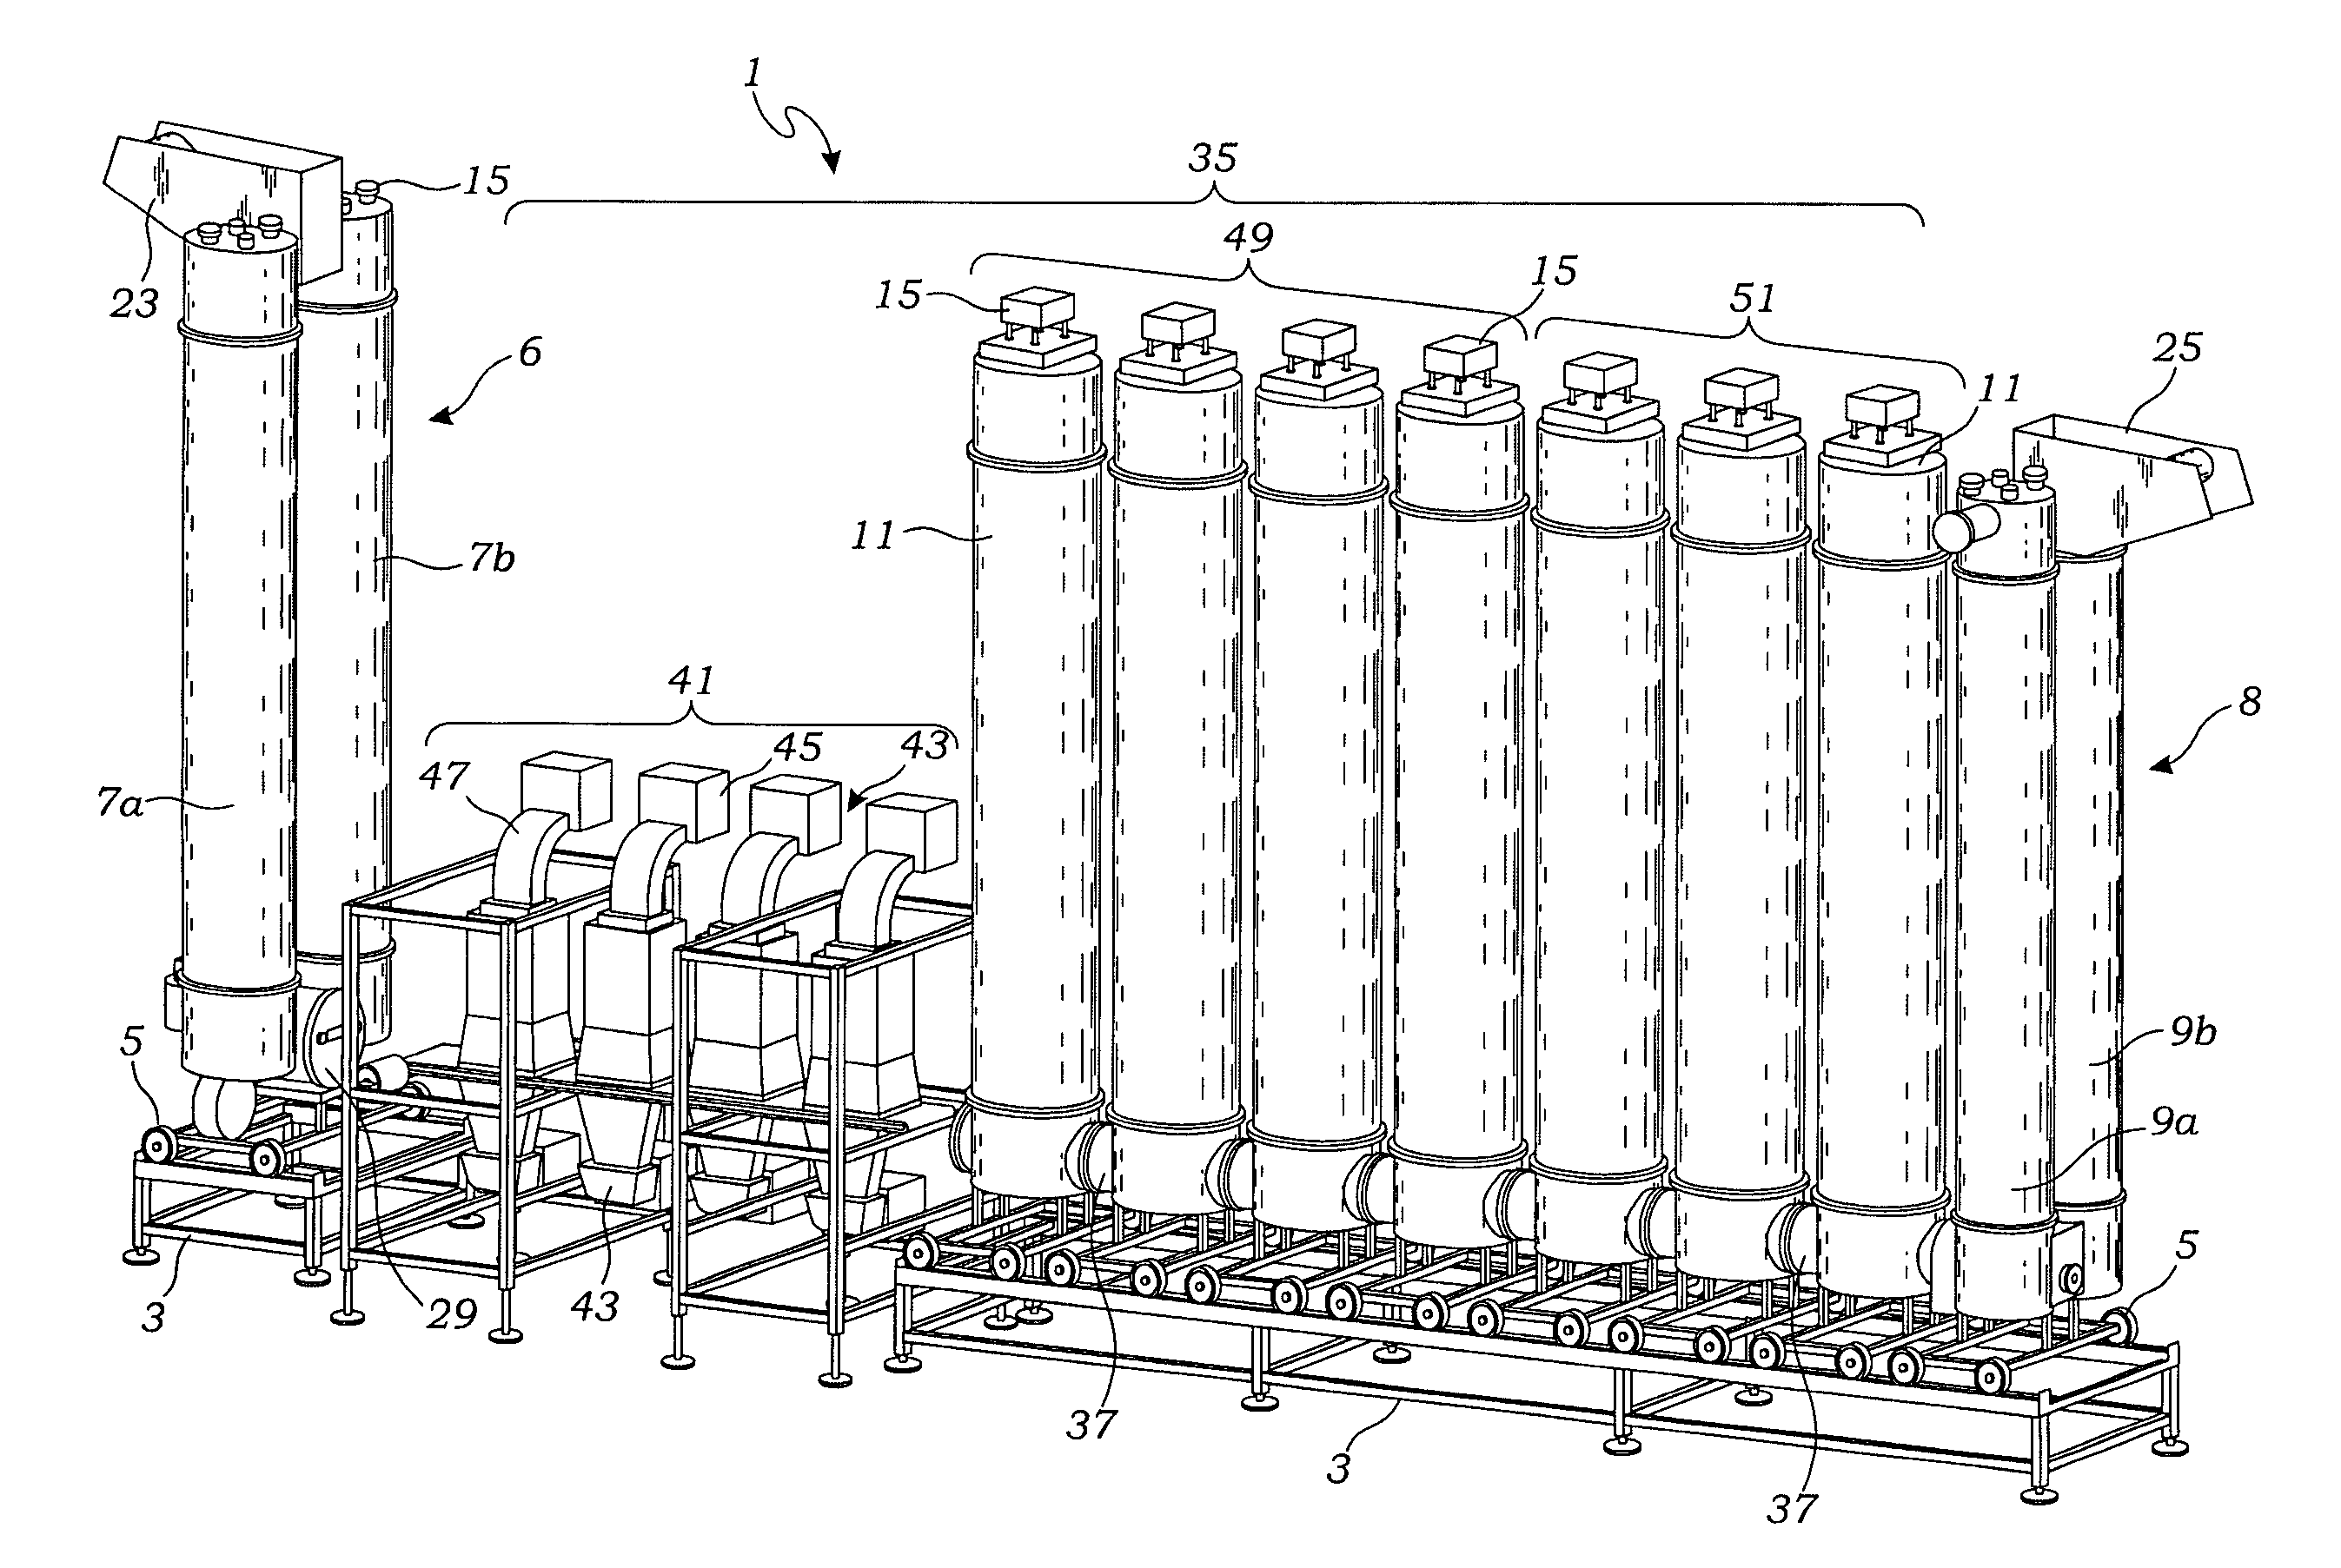 Apparatus and method for mass sterilization and pasteurization of food products